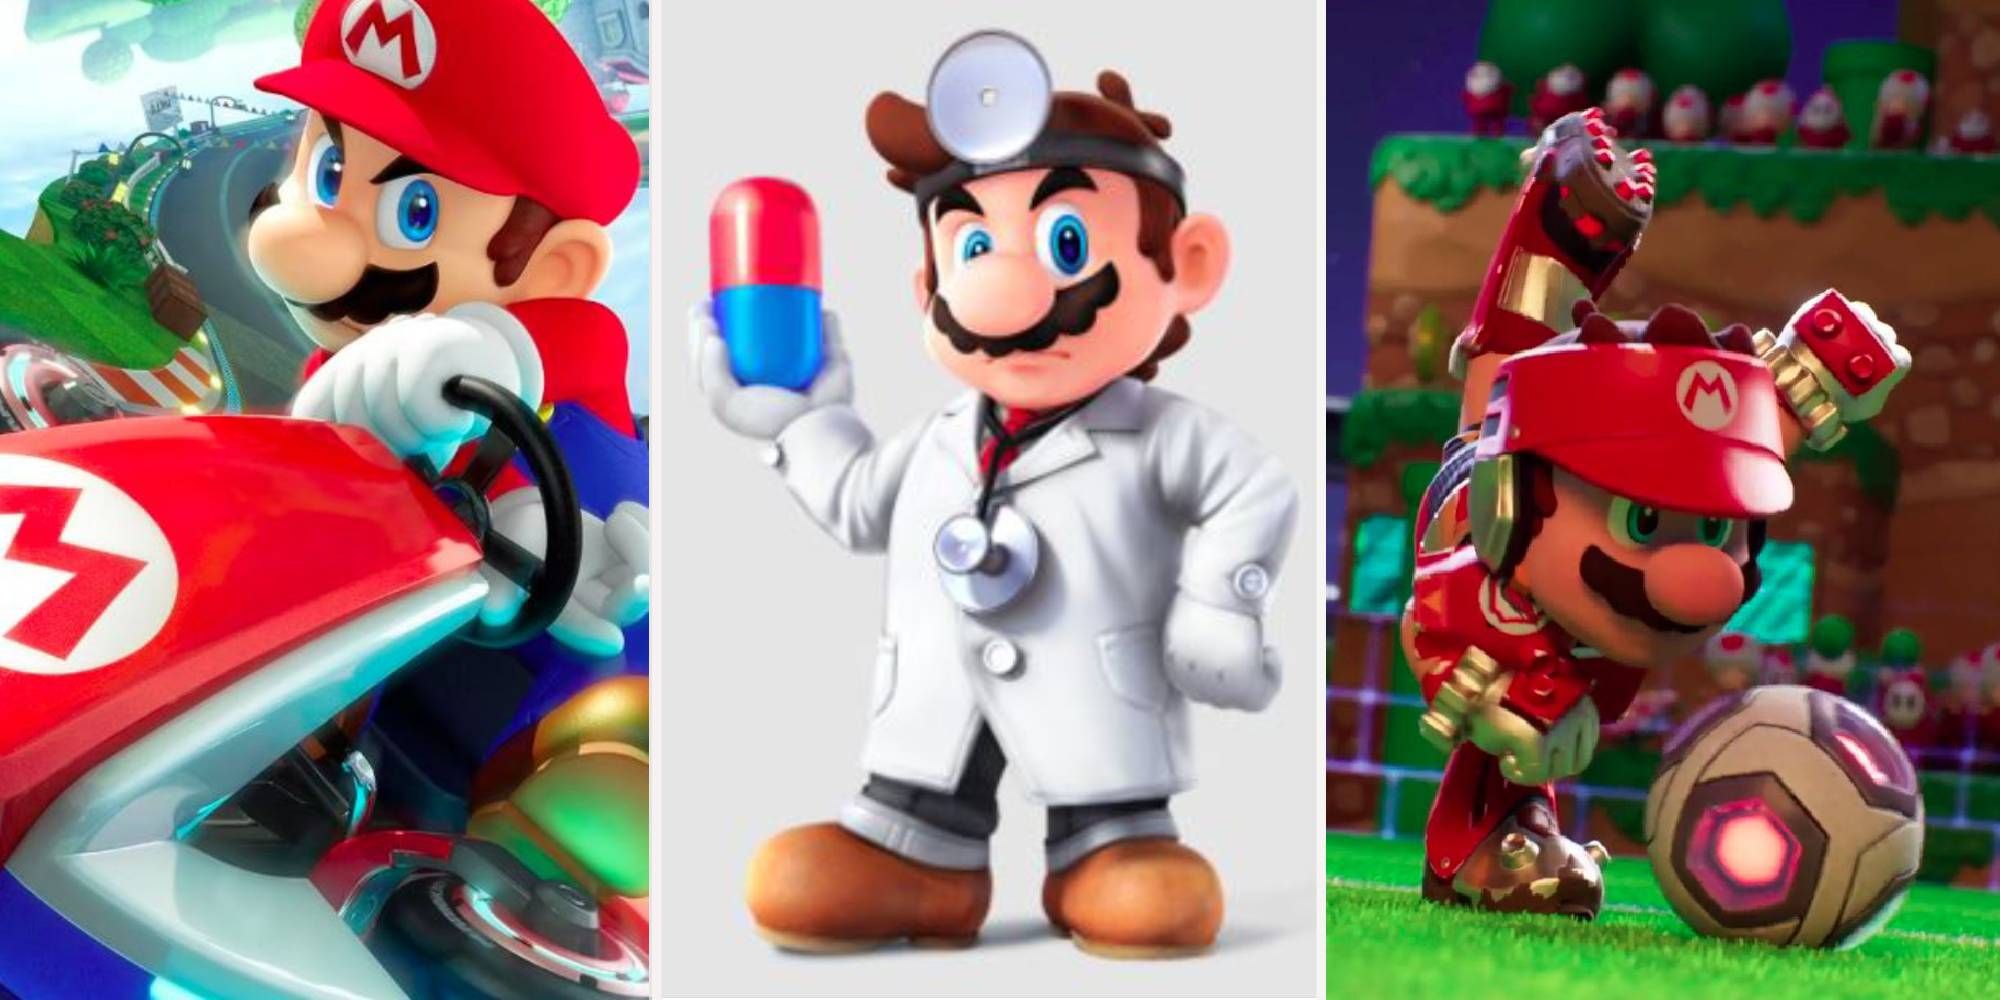 Mario's Jobs ranked by how unqualified he is feature image - Mario Karting, Mario being a doctor and Mario kicking a football